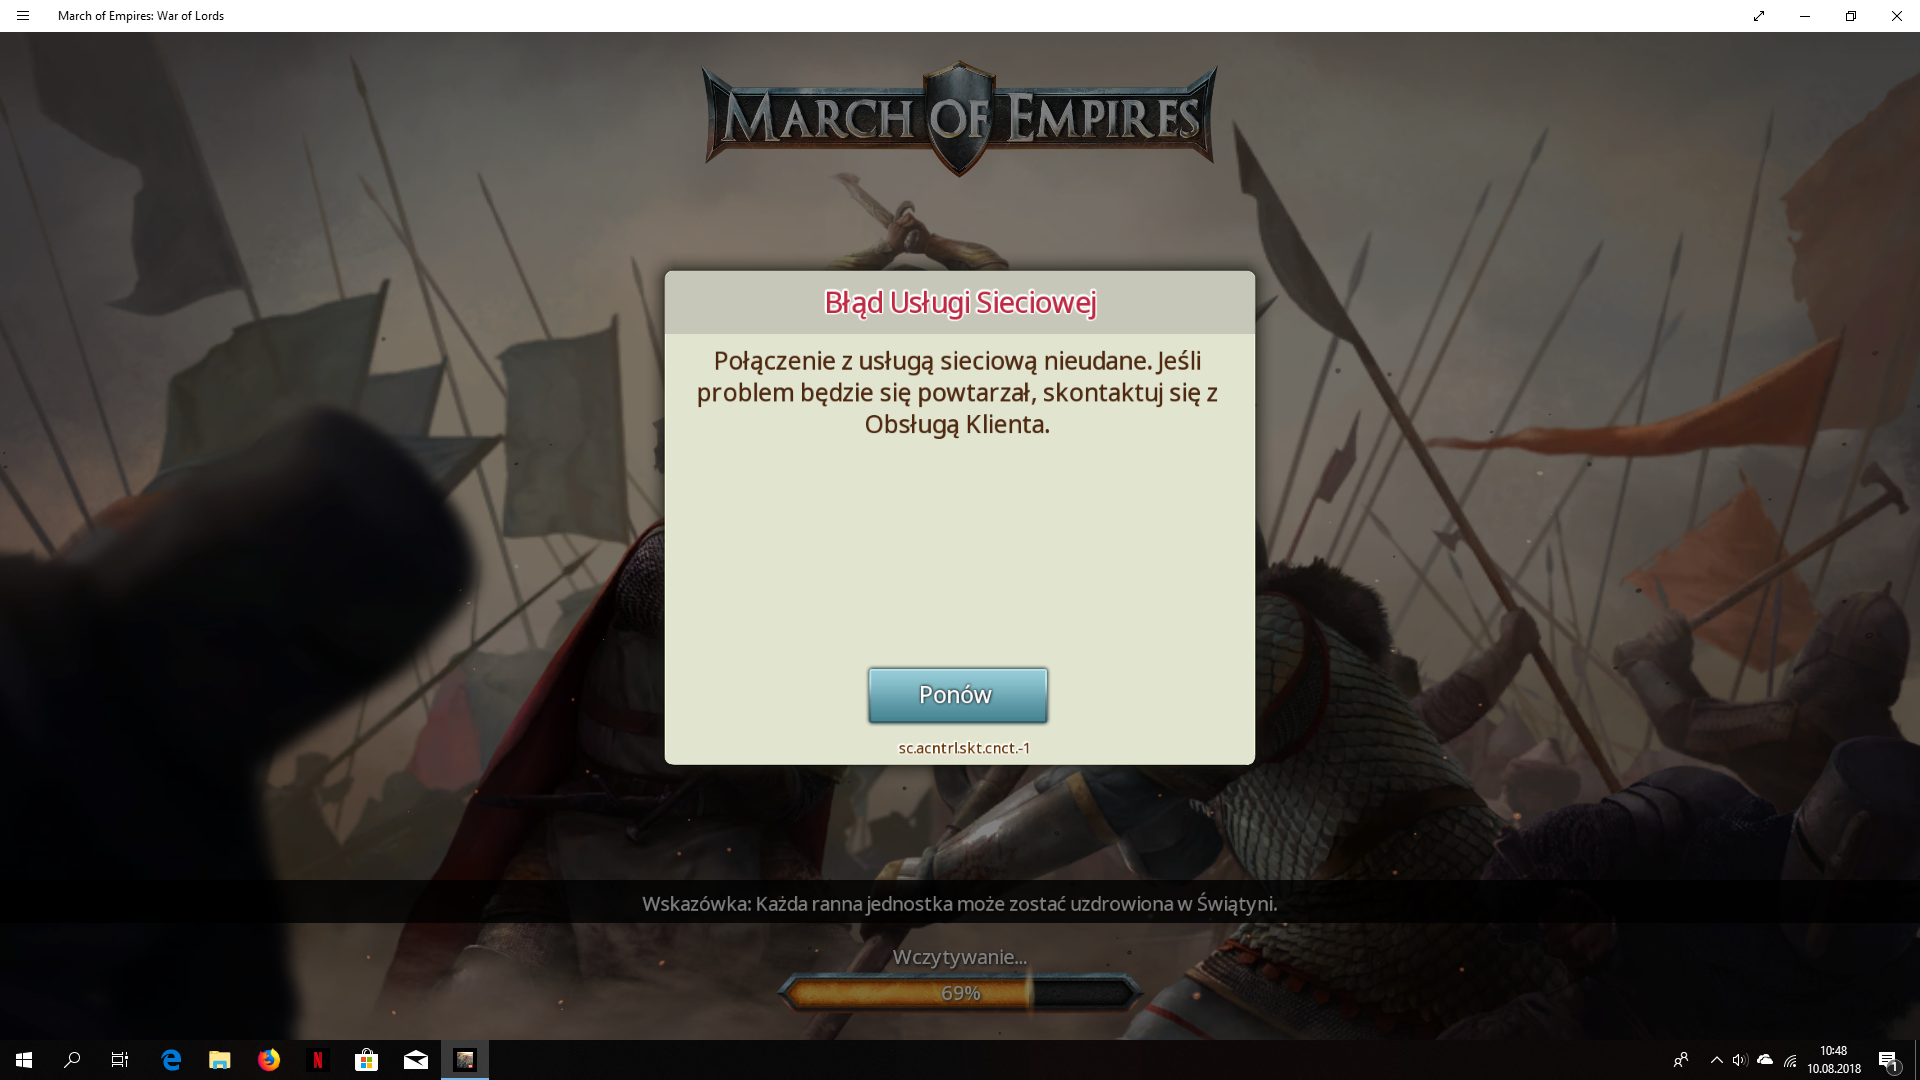 march of empire war of lords cheats